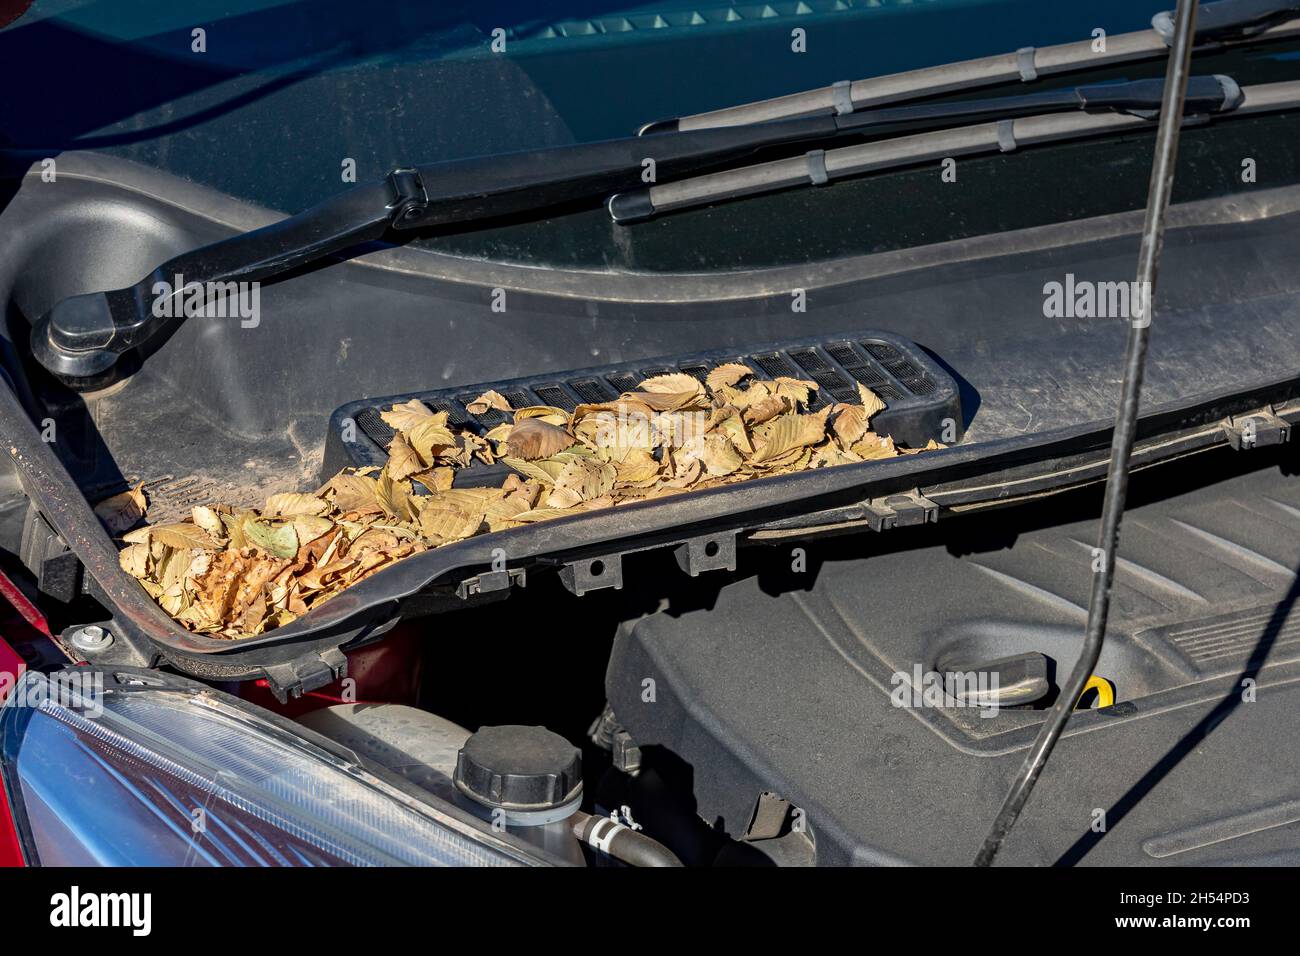 Car ventilation air intake clogged with leaves. Concept of vehicle climate control maintenance, repair and service Stock Photo